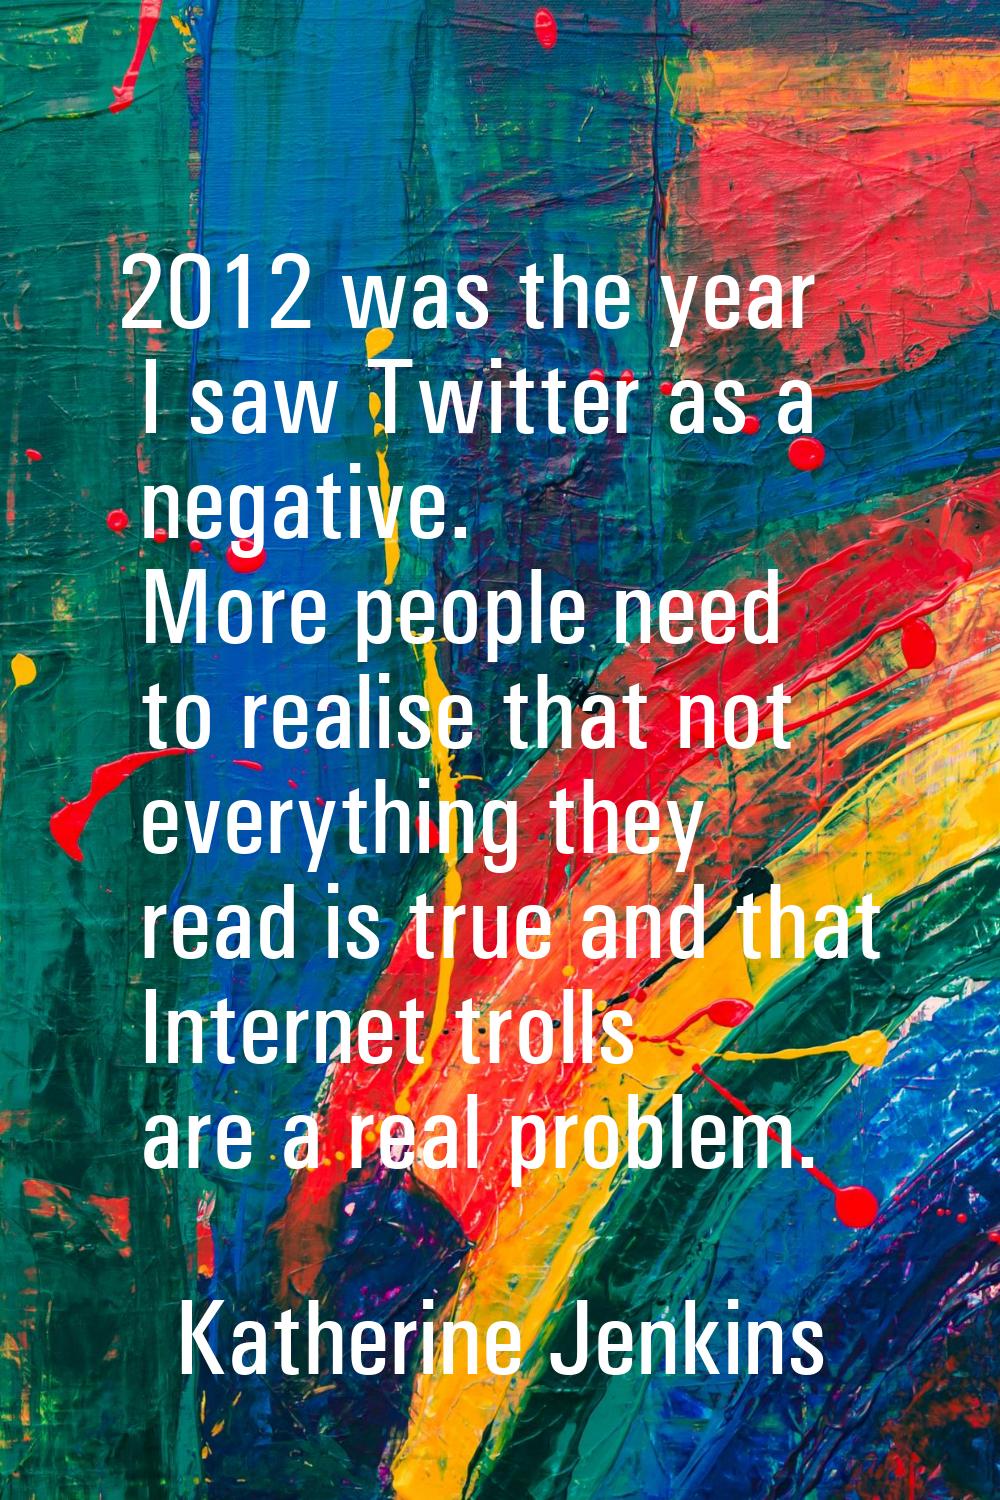 2012 was the year I saw Twitter as a negative. More people need to realise that not everything they